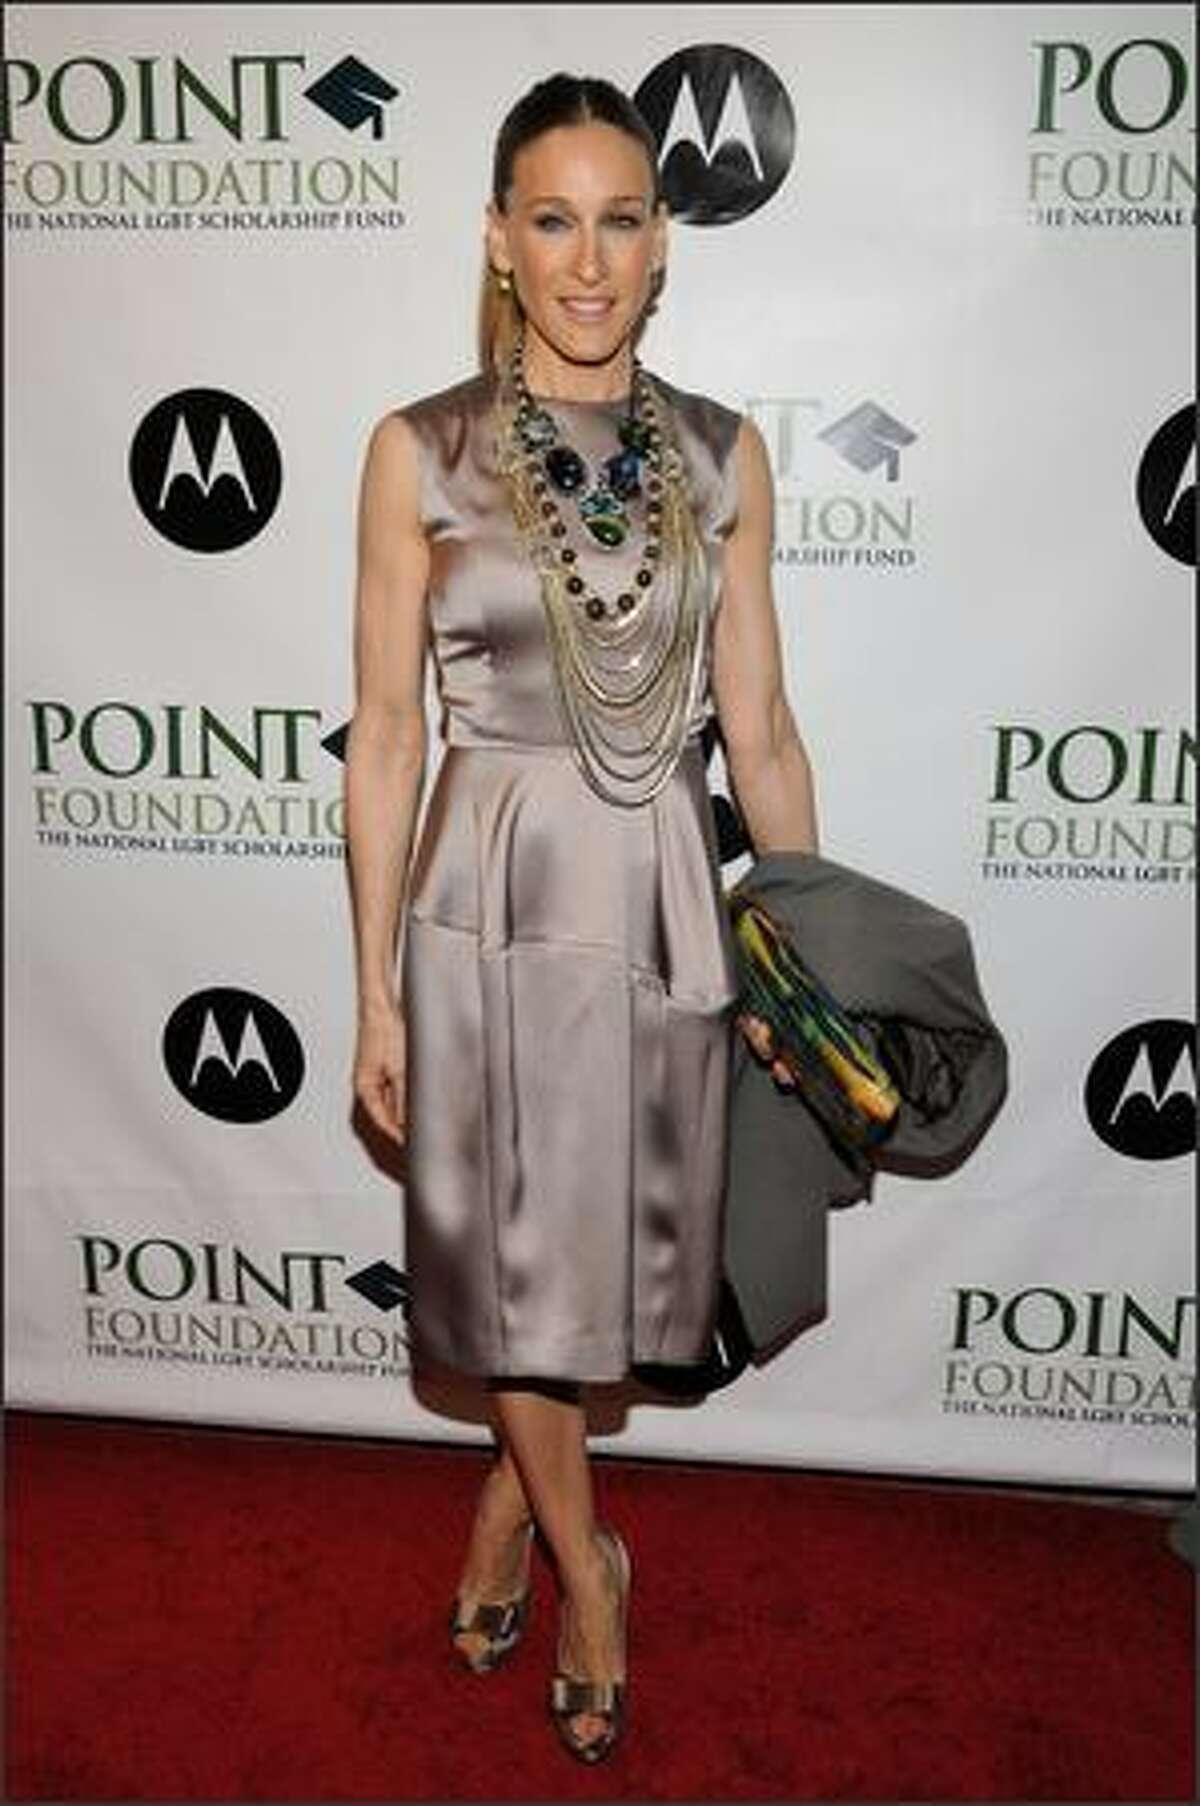 This is the second in an occasional series featuring stars and their ever-changing fashion styles. Sarah Jessica Parker arrives at the Point Foundation hosts Point Honors ... The Arts at Capitale in New York on April 7, 2008.